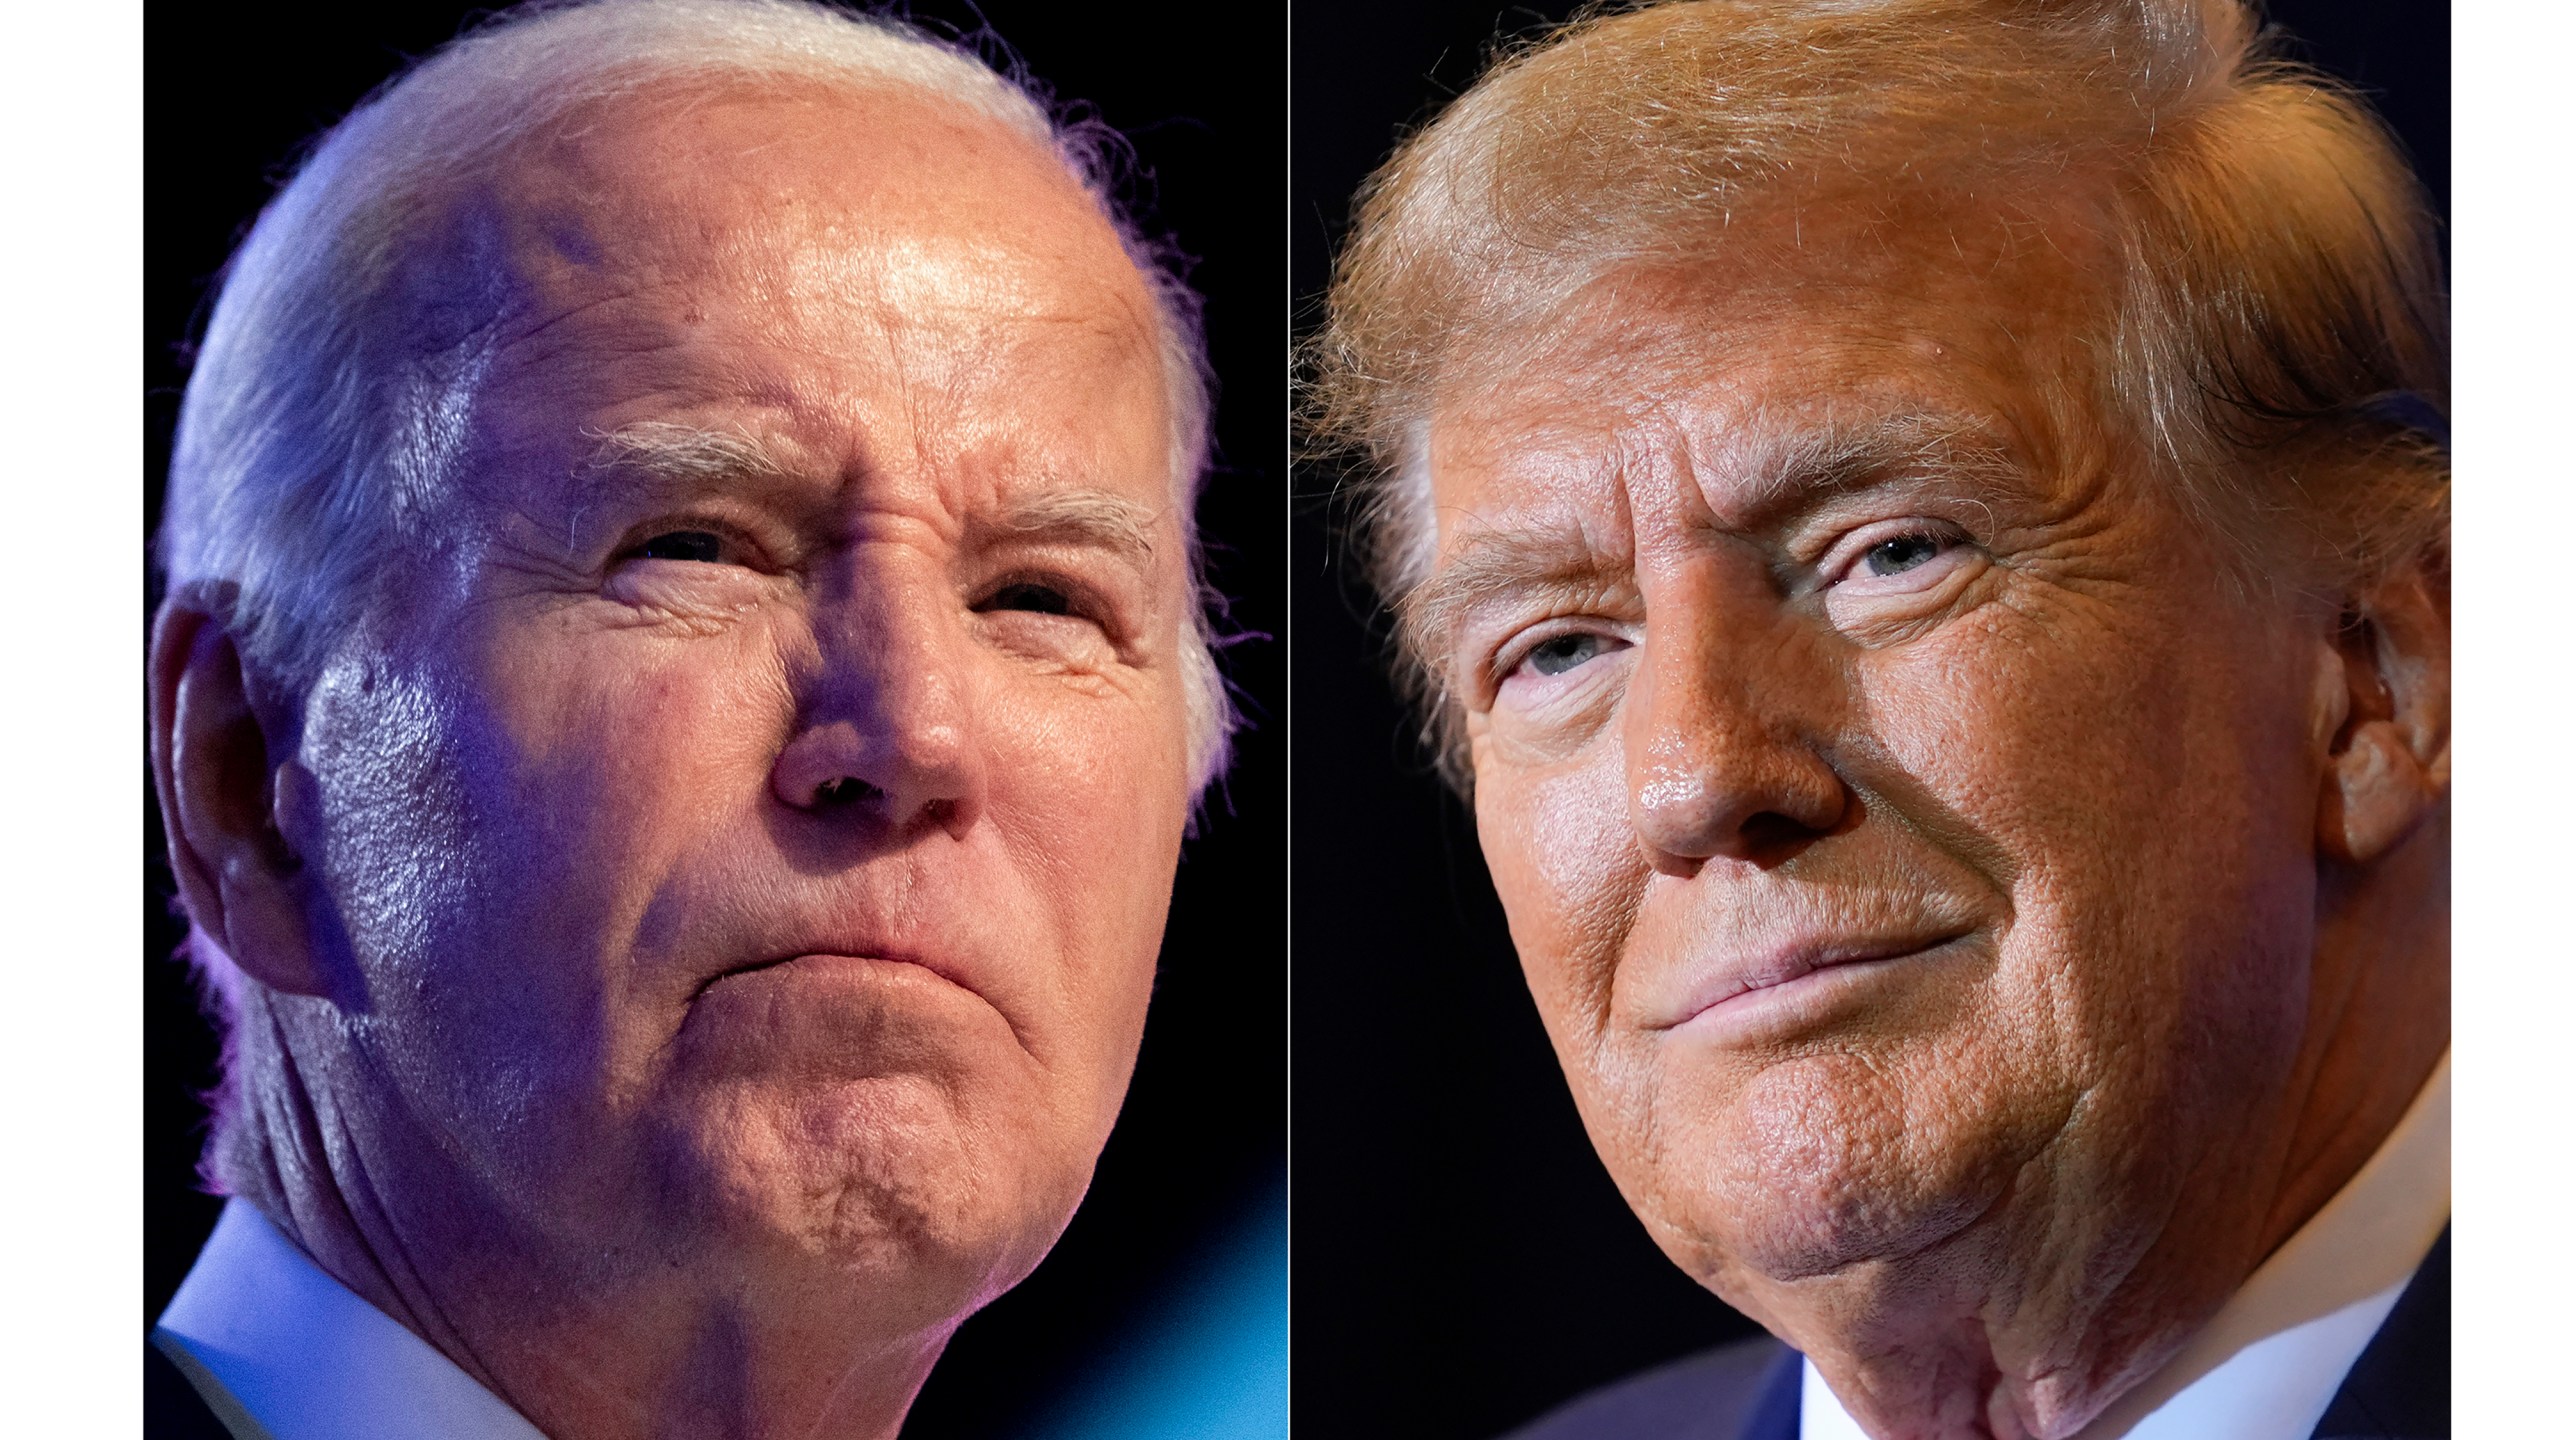 FILE - This combo image shows President Joe Biden, left, Jan. 5, 2024, and Republican presidential candidate former President Donald Trump, right, Jan. 19, 2024. (AP Photo, File)